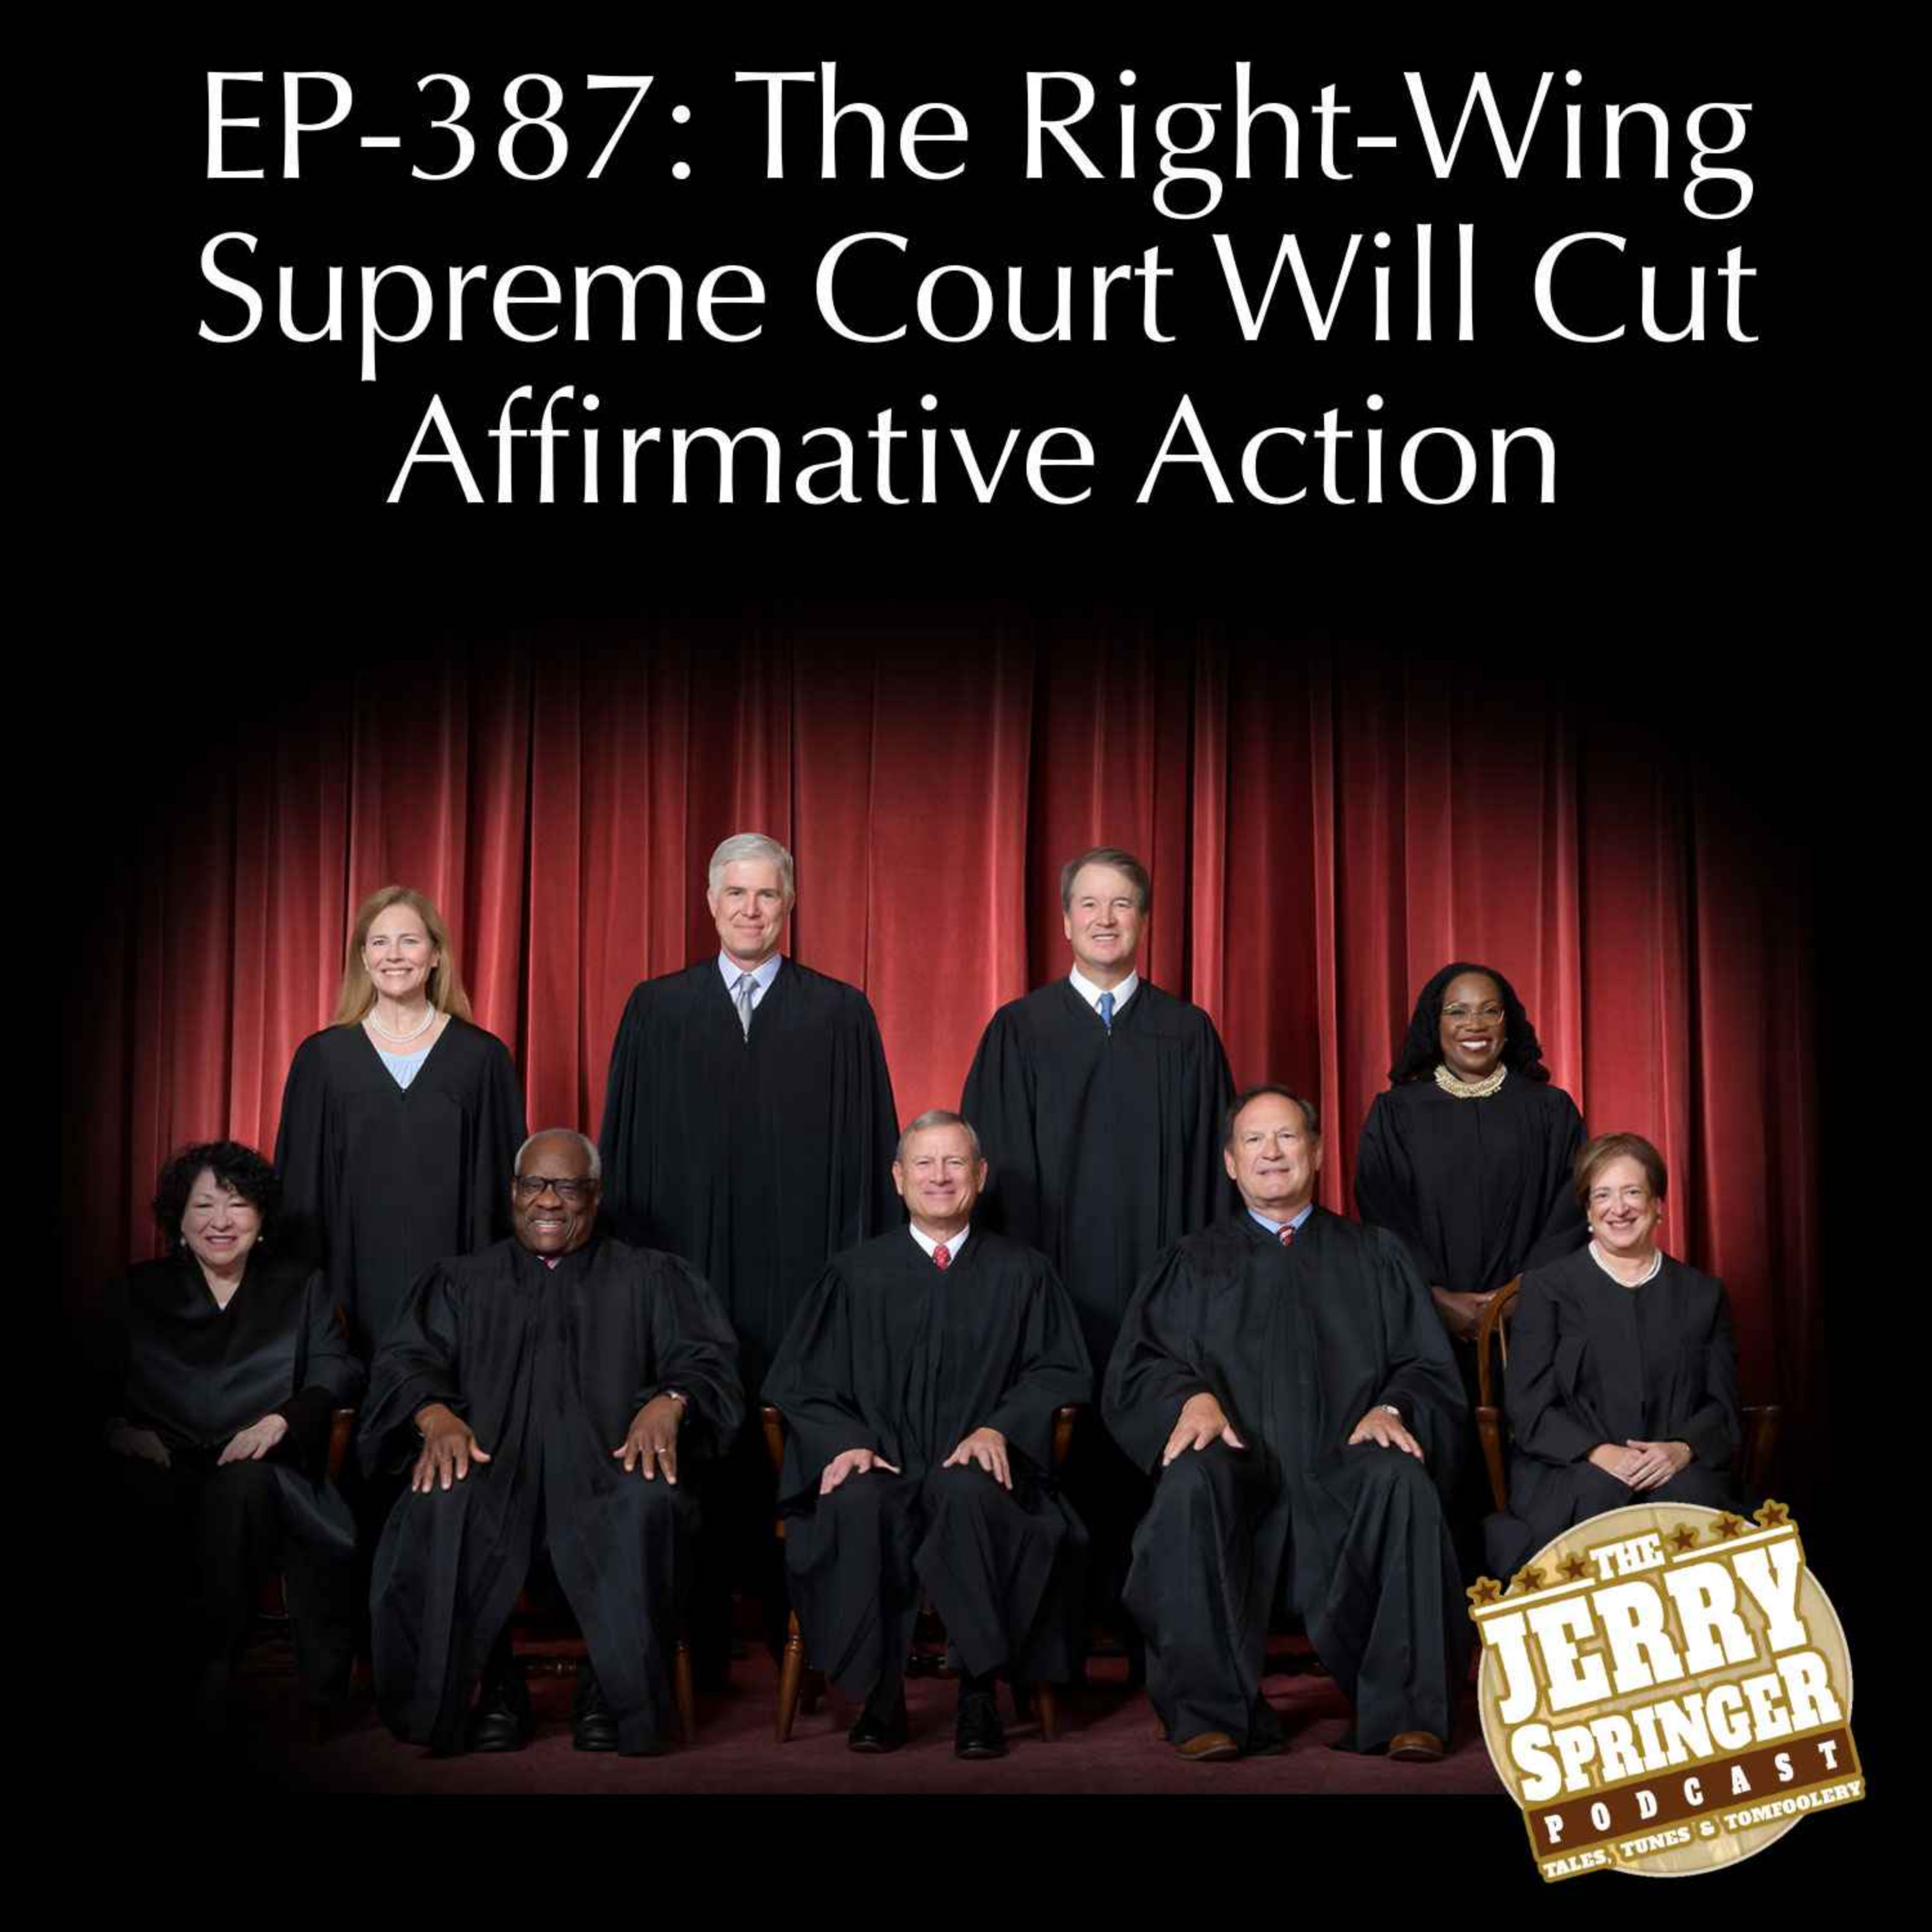 The Right-Wing Supreme Court Will Cut Affirmative Action: EP - 387